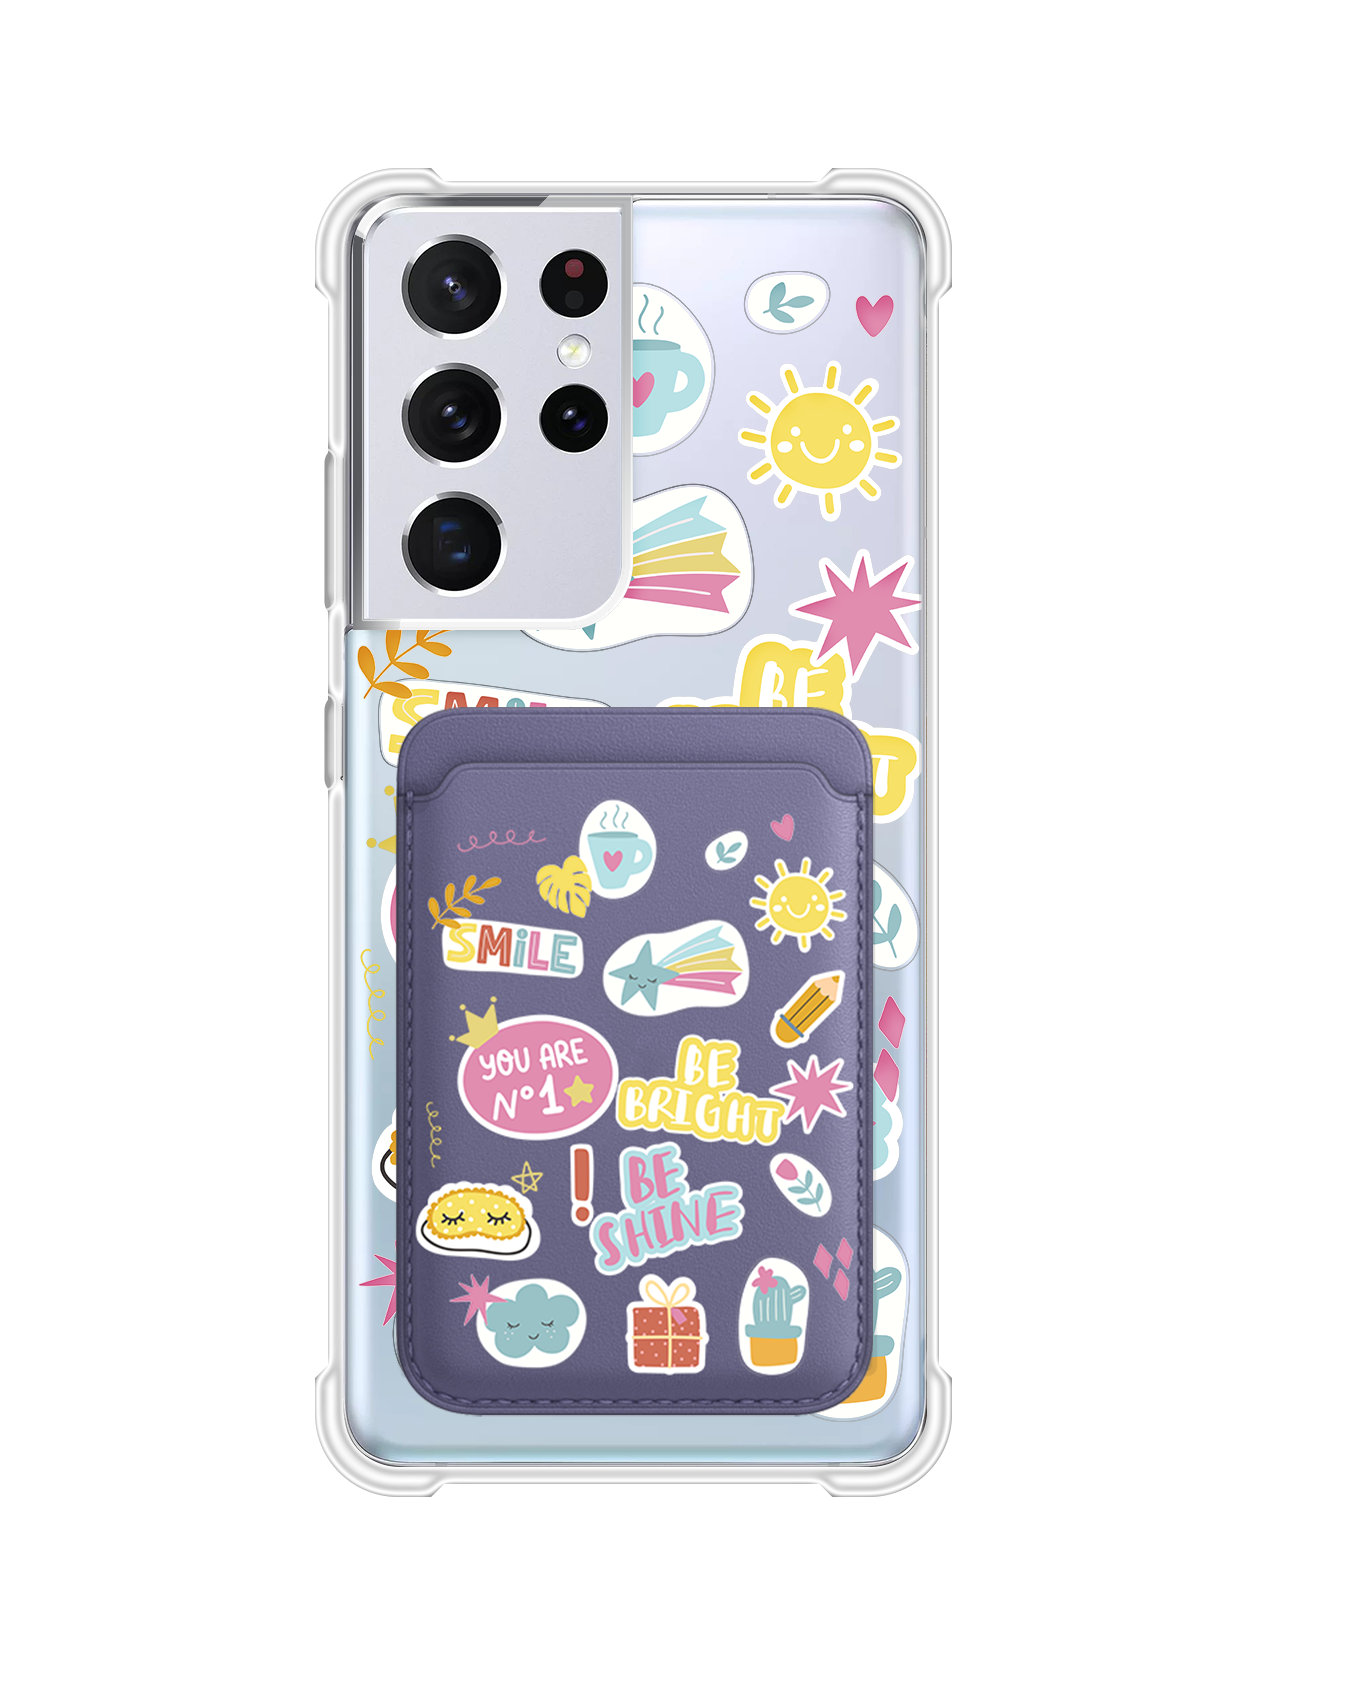 Android Magnetic Wallet Case - Self Love Sticker Pack 3.0